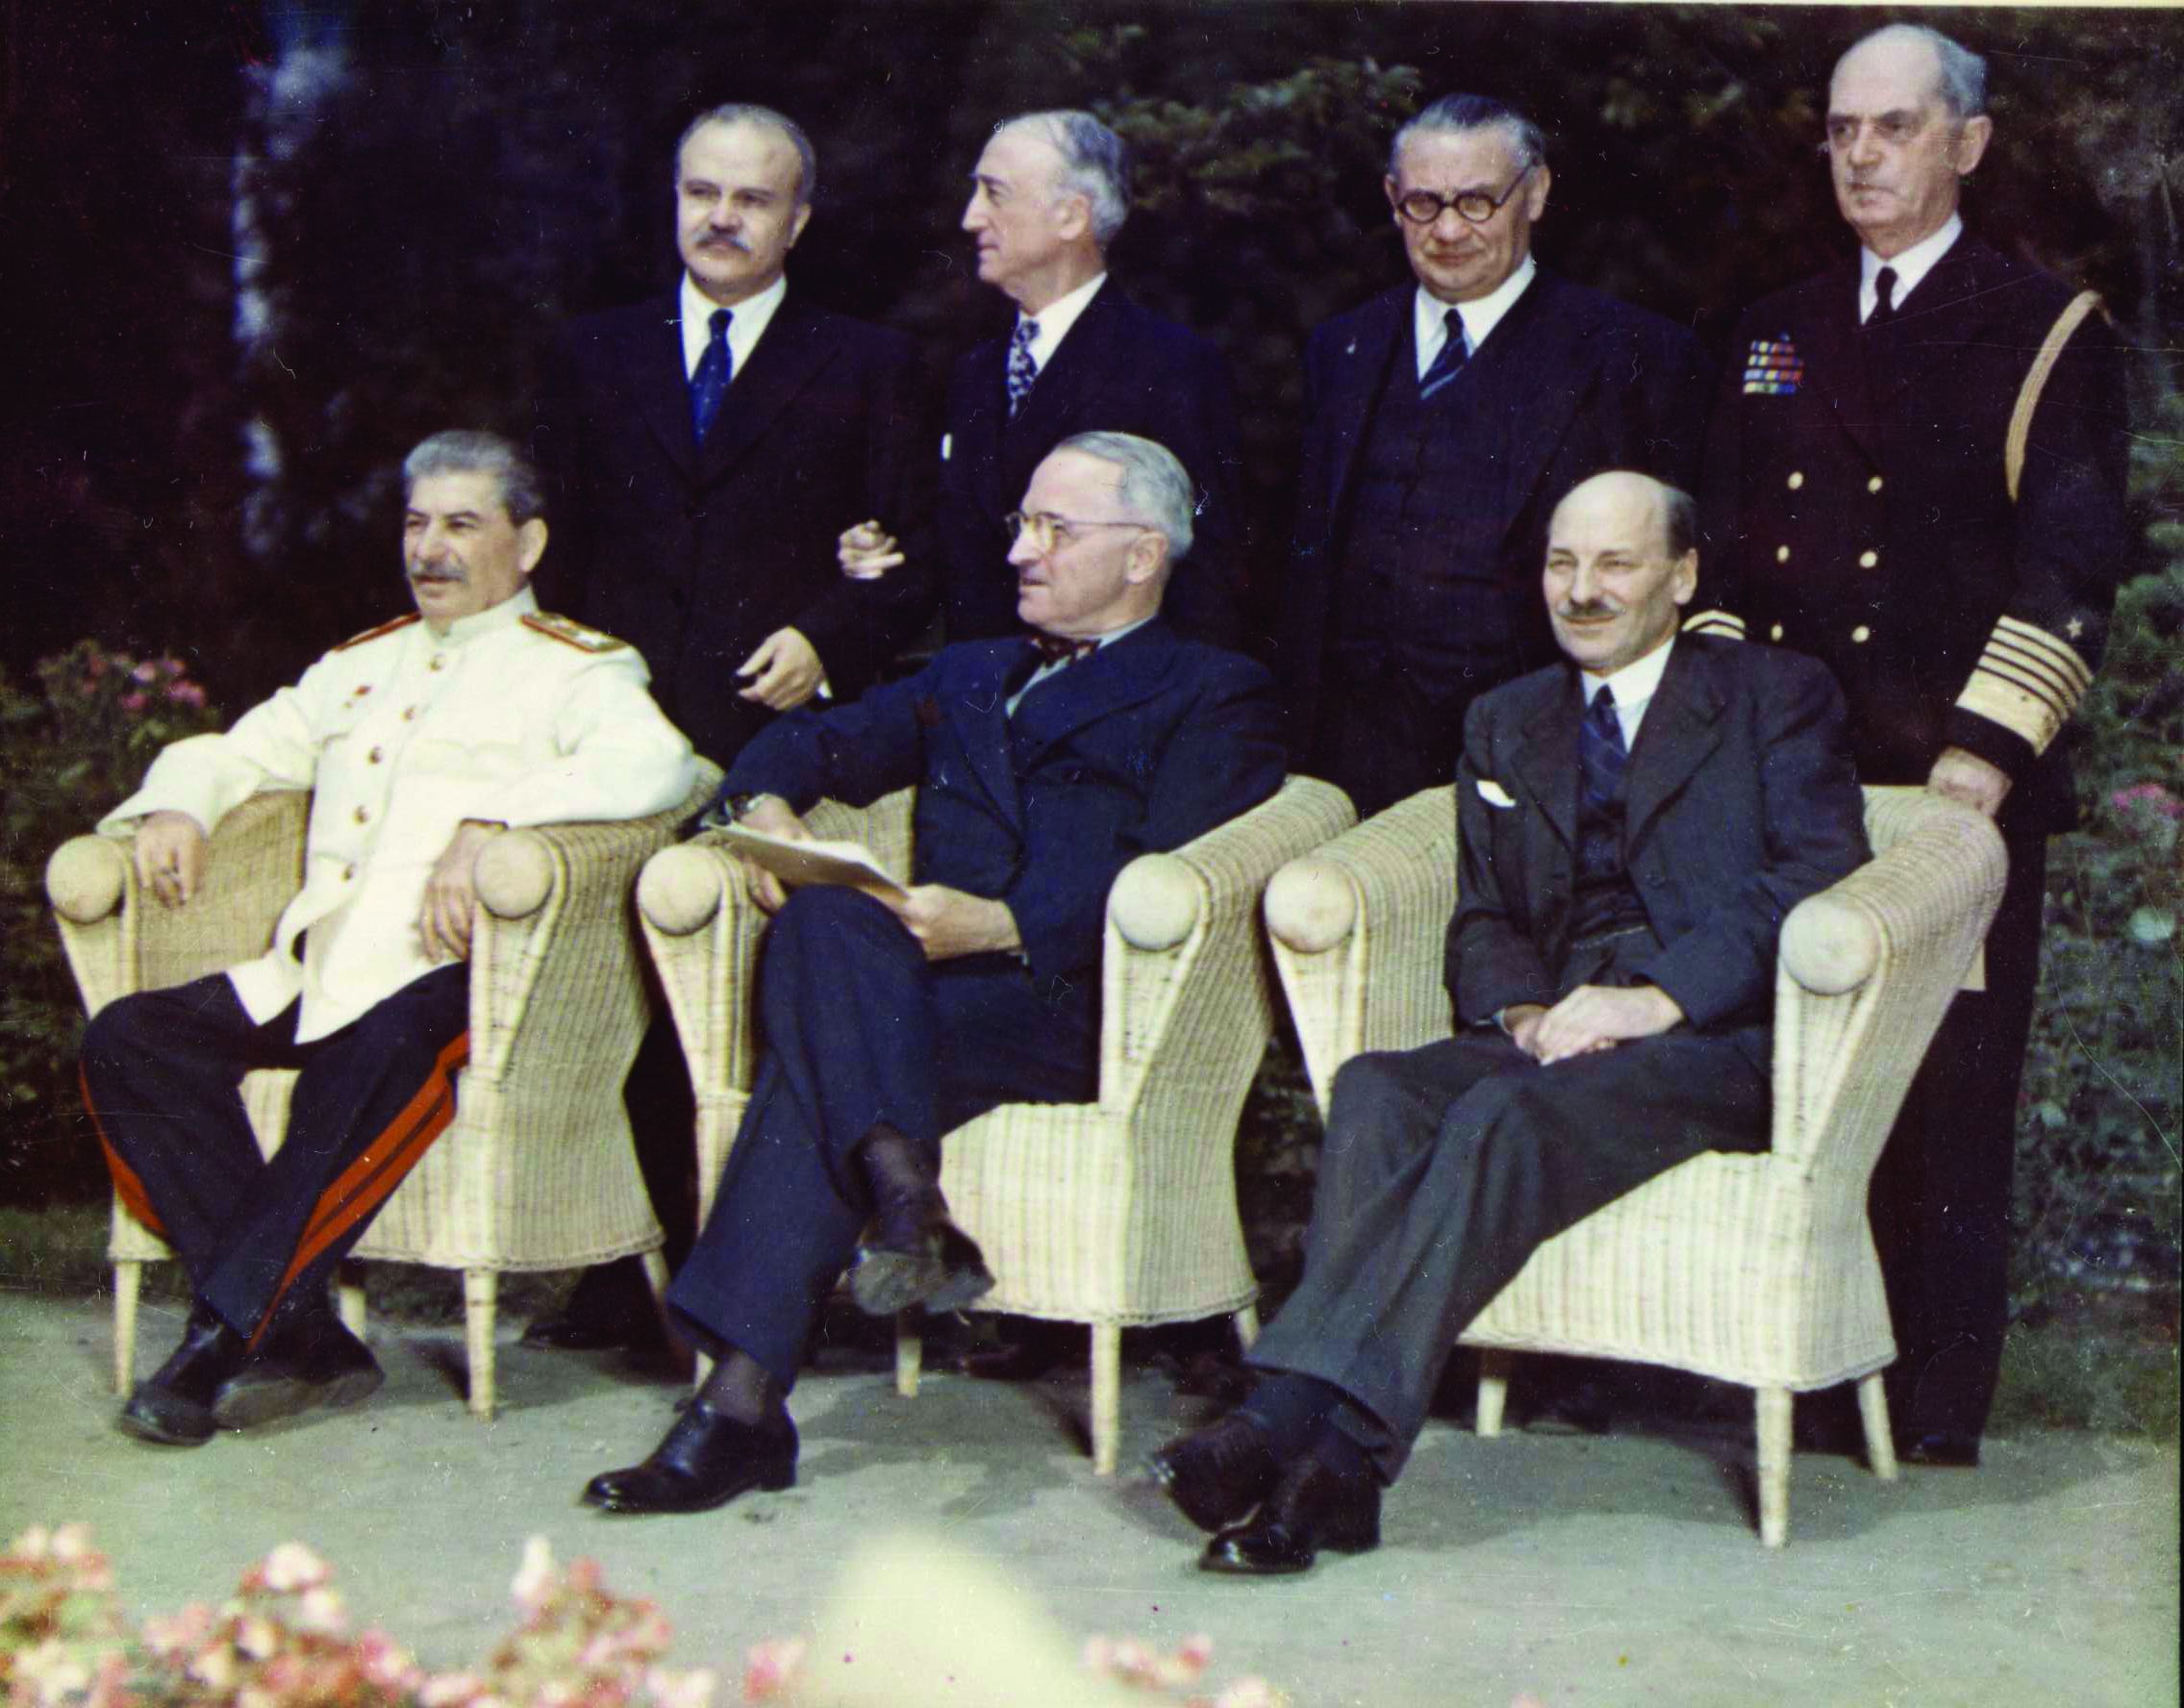 The Big Three at the Potsdam Conference in 1945 included (seated left to right) Soviet Premier Josef Stalin, U.S. President Harry Truman, and British Prime Minister Clement Attlee.